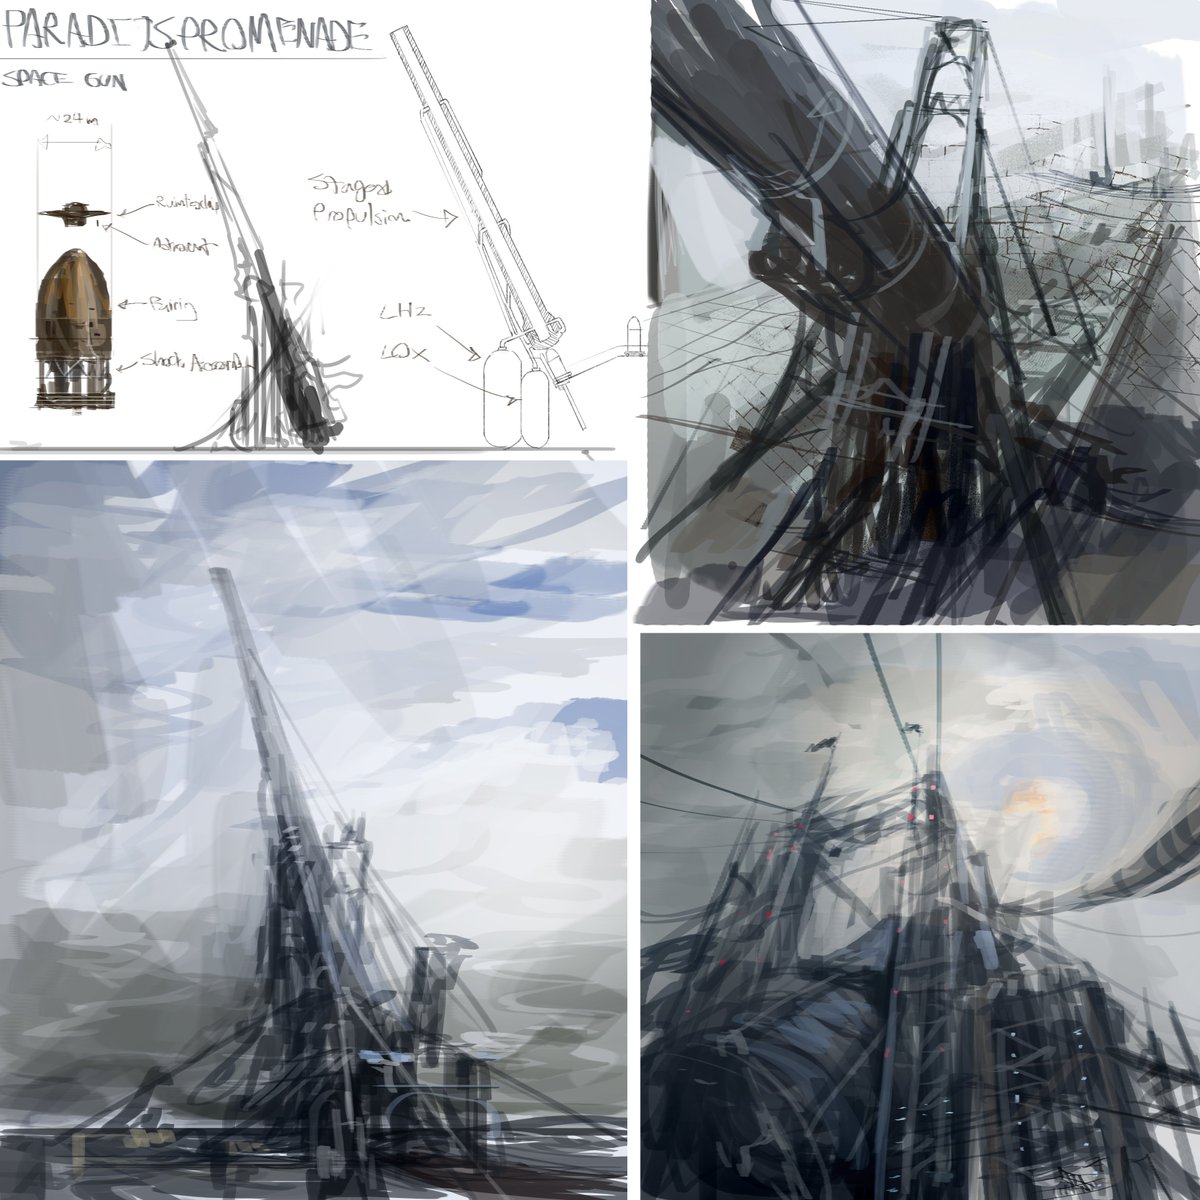 Sketches of Paradijspromenade, which is now a space gun instead of a space elevator (because of course the Endrish would build a space gun instead of a space elevator). 